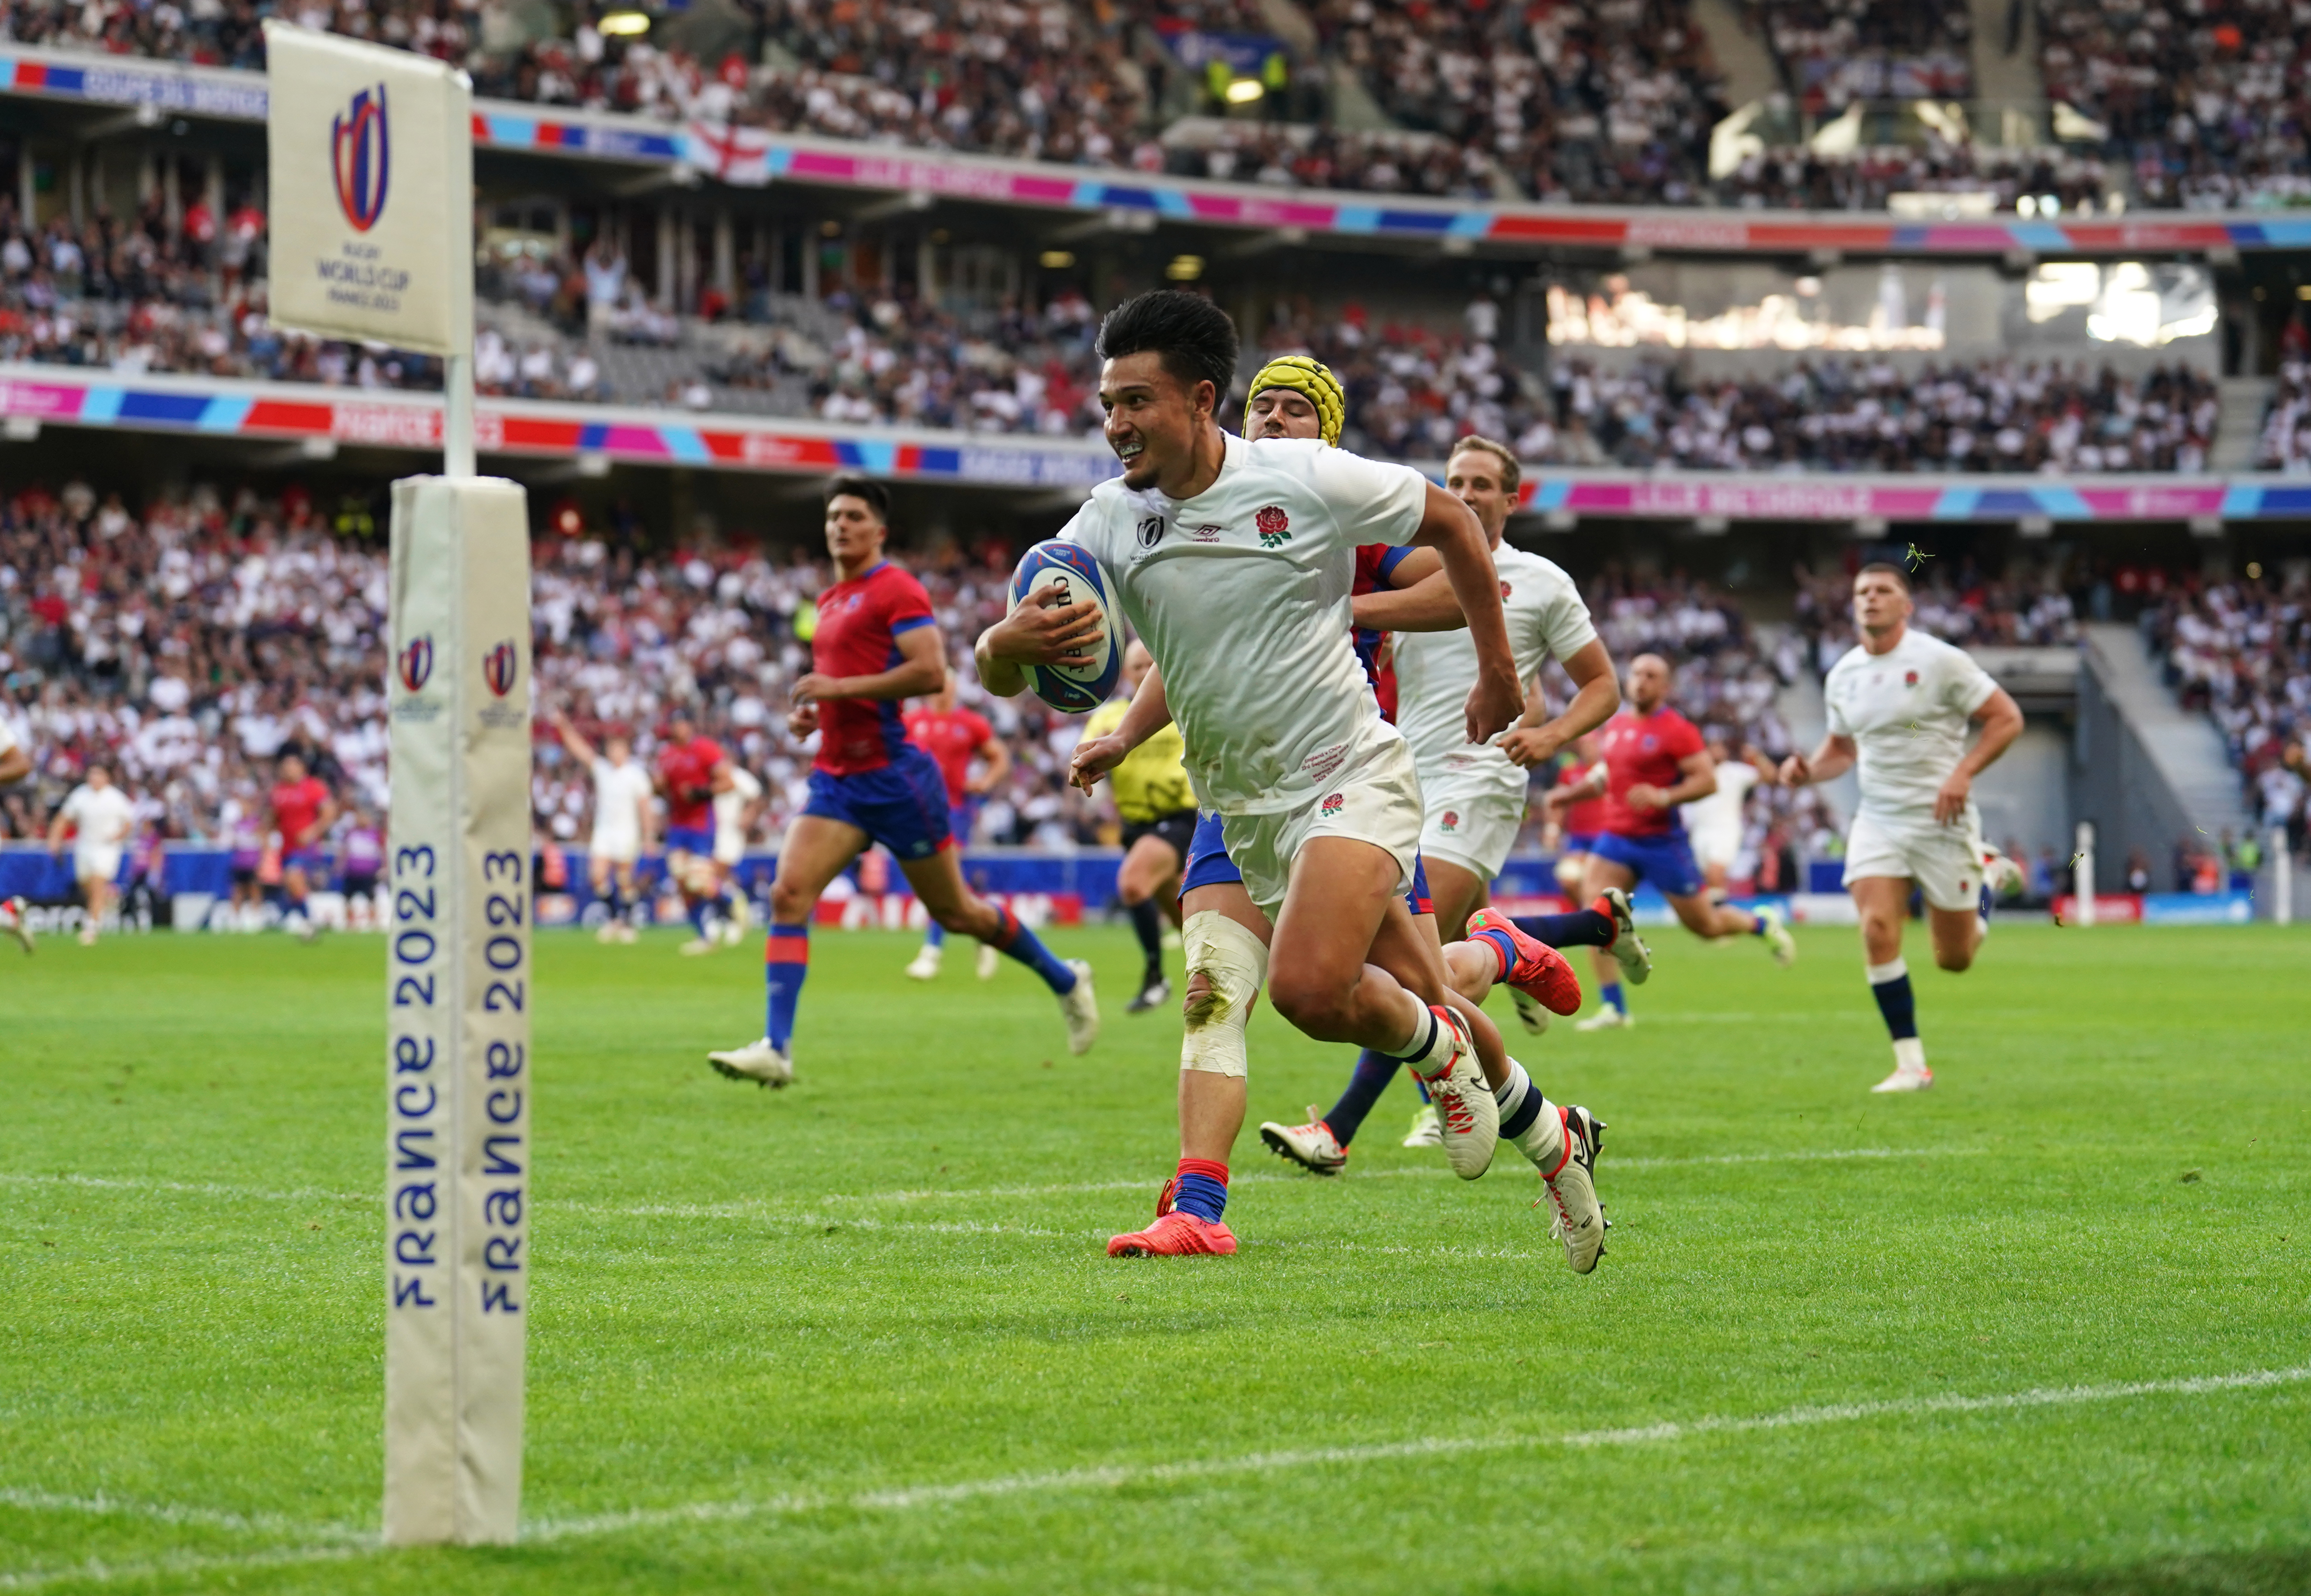 Marcus Smith on his way to scoring England's fifth try against Chile